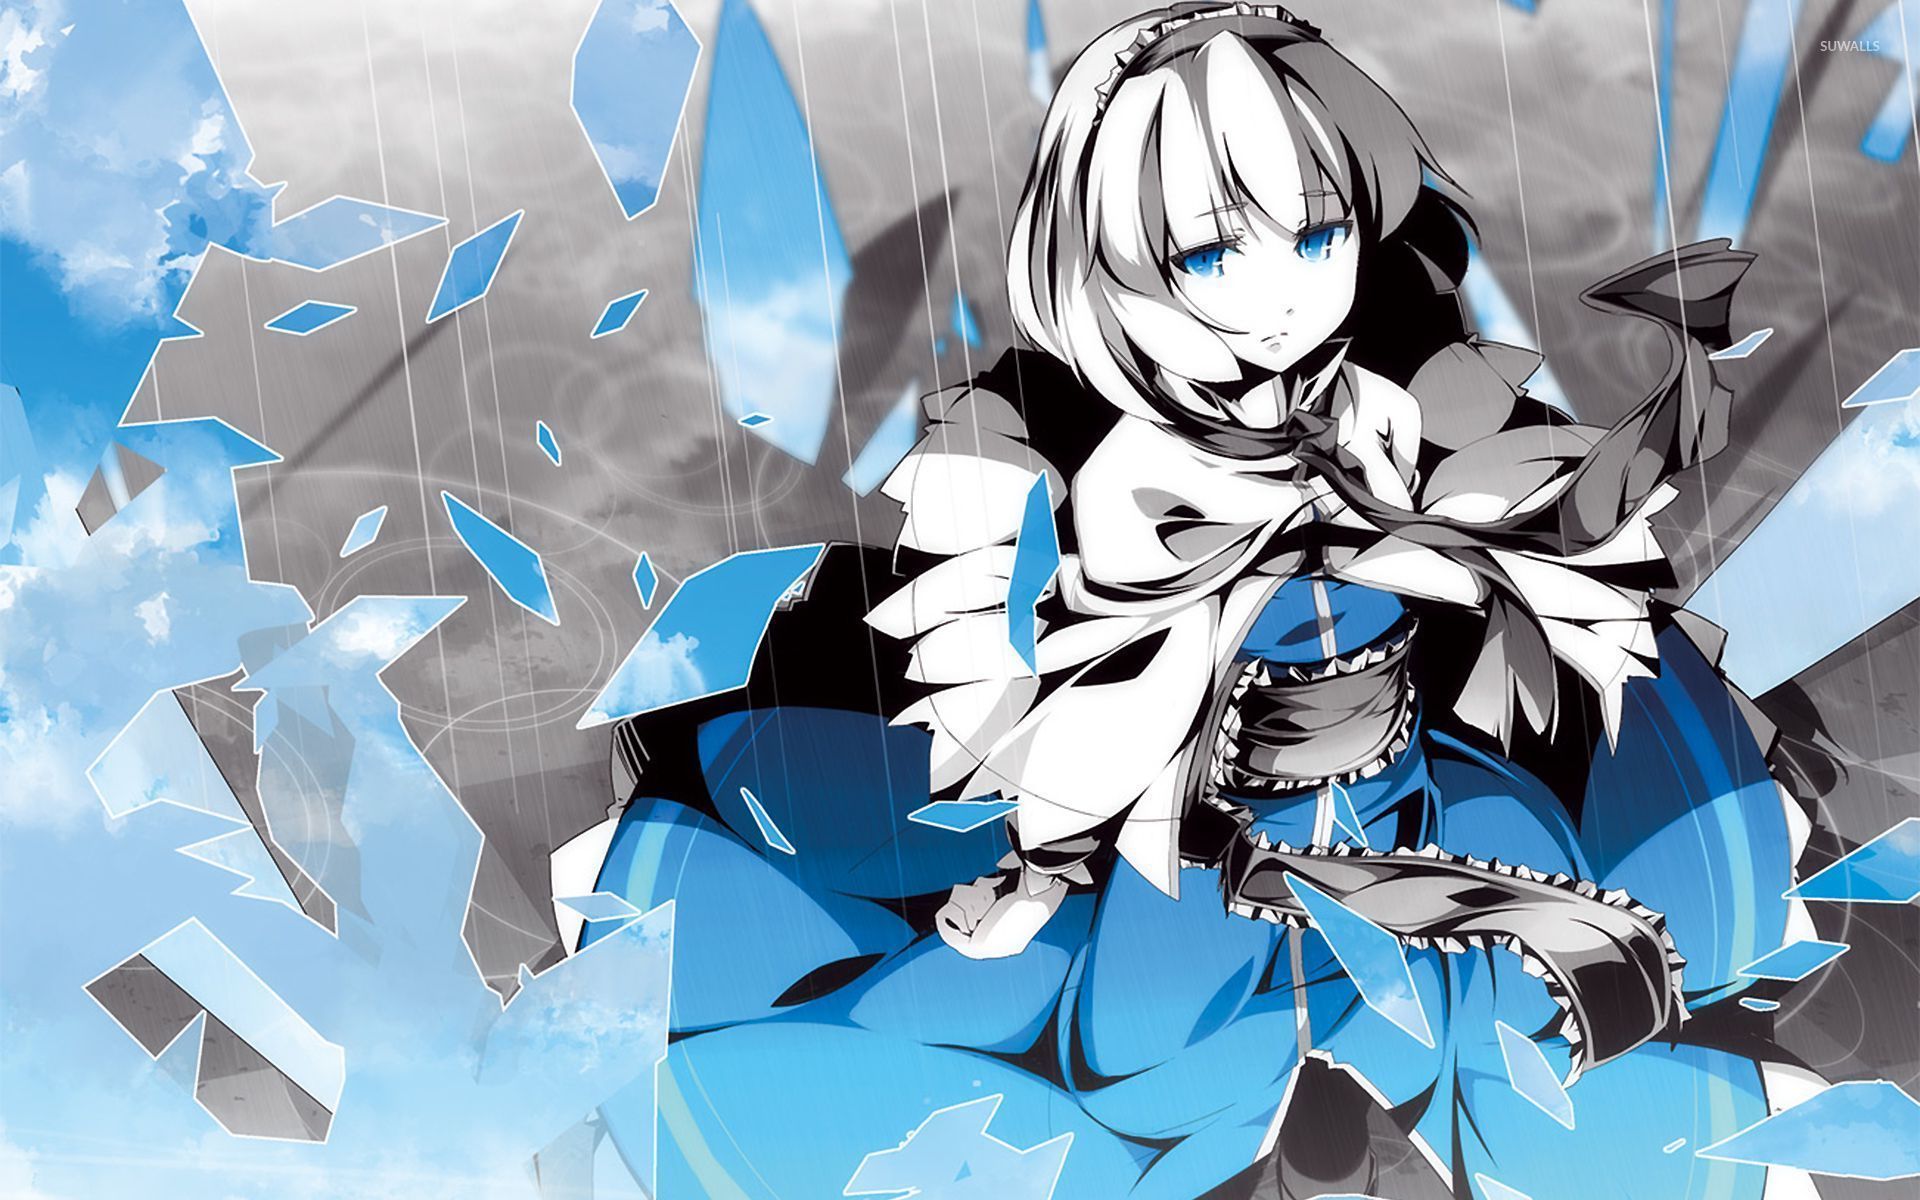 Cirno   Touhou Project wallpaper   Anime wallpapers   26605